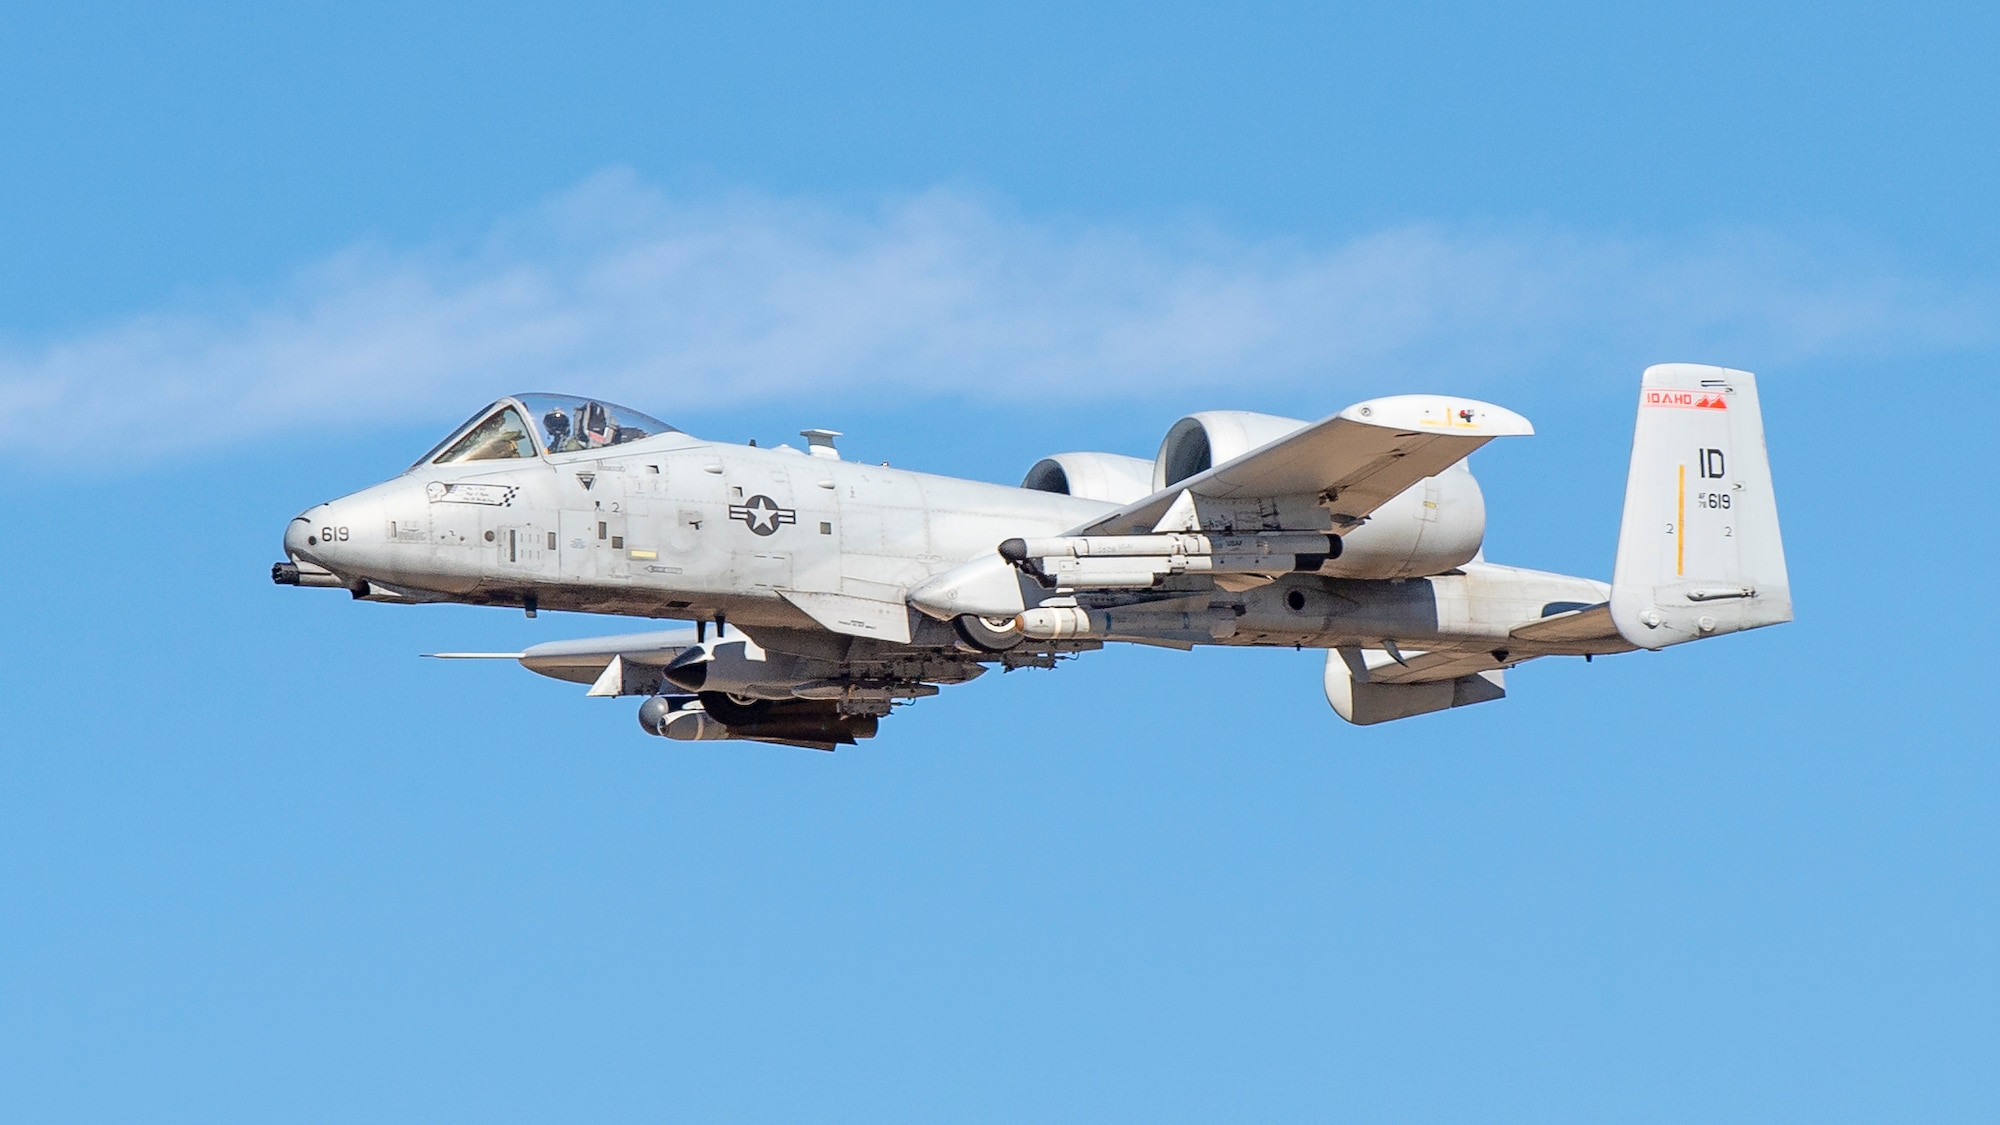 A 124th Fighter Wing A-10 Flying